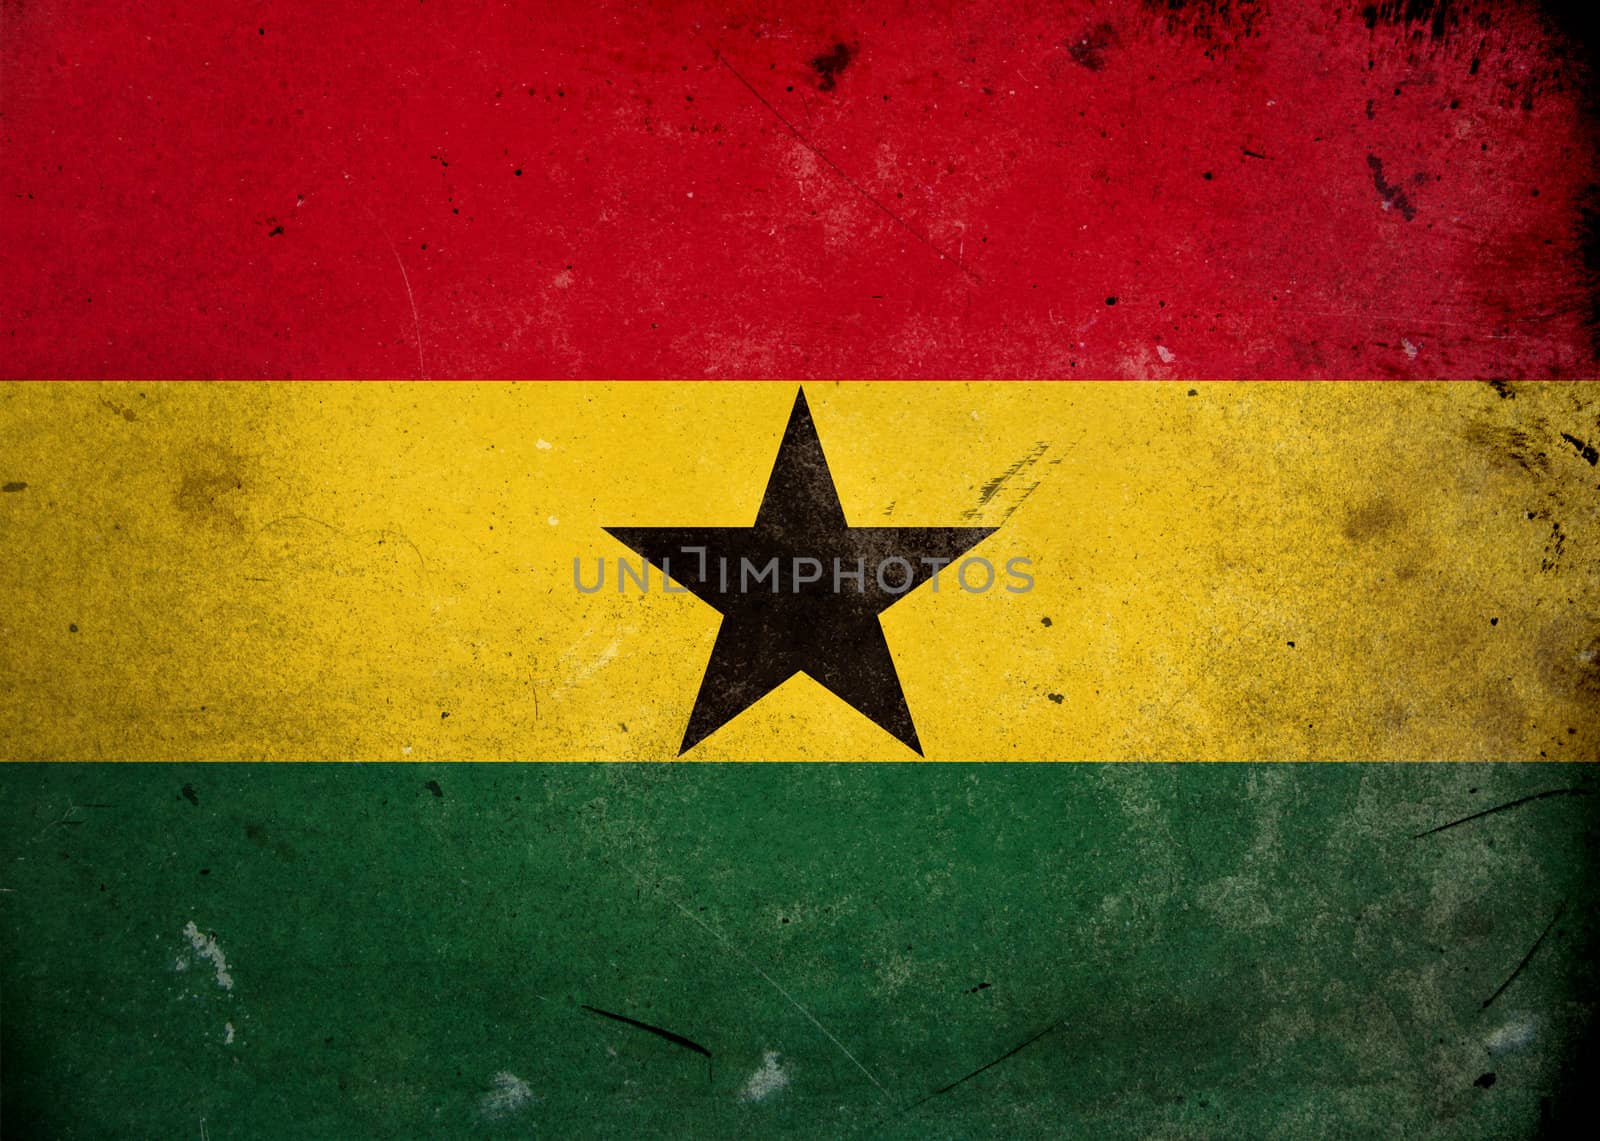 The flag of Ghana on old and vintage grunge texture